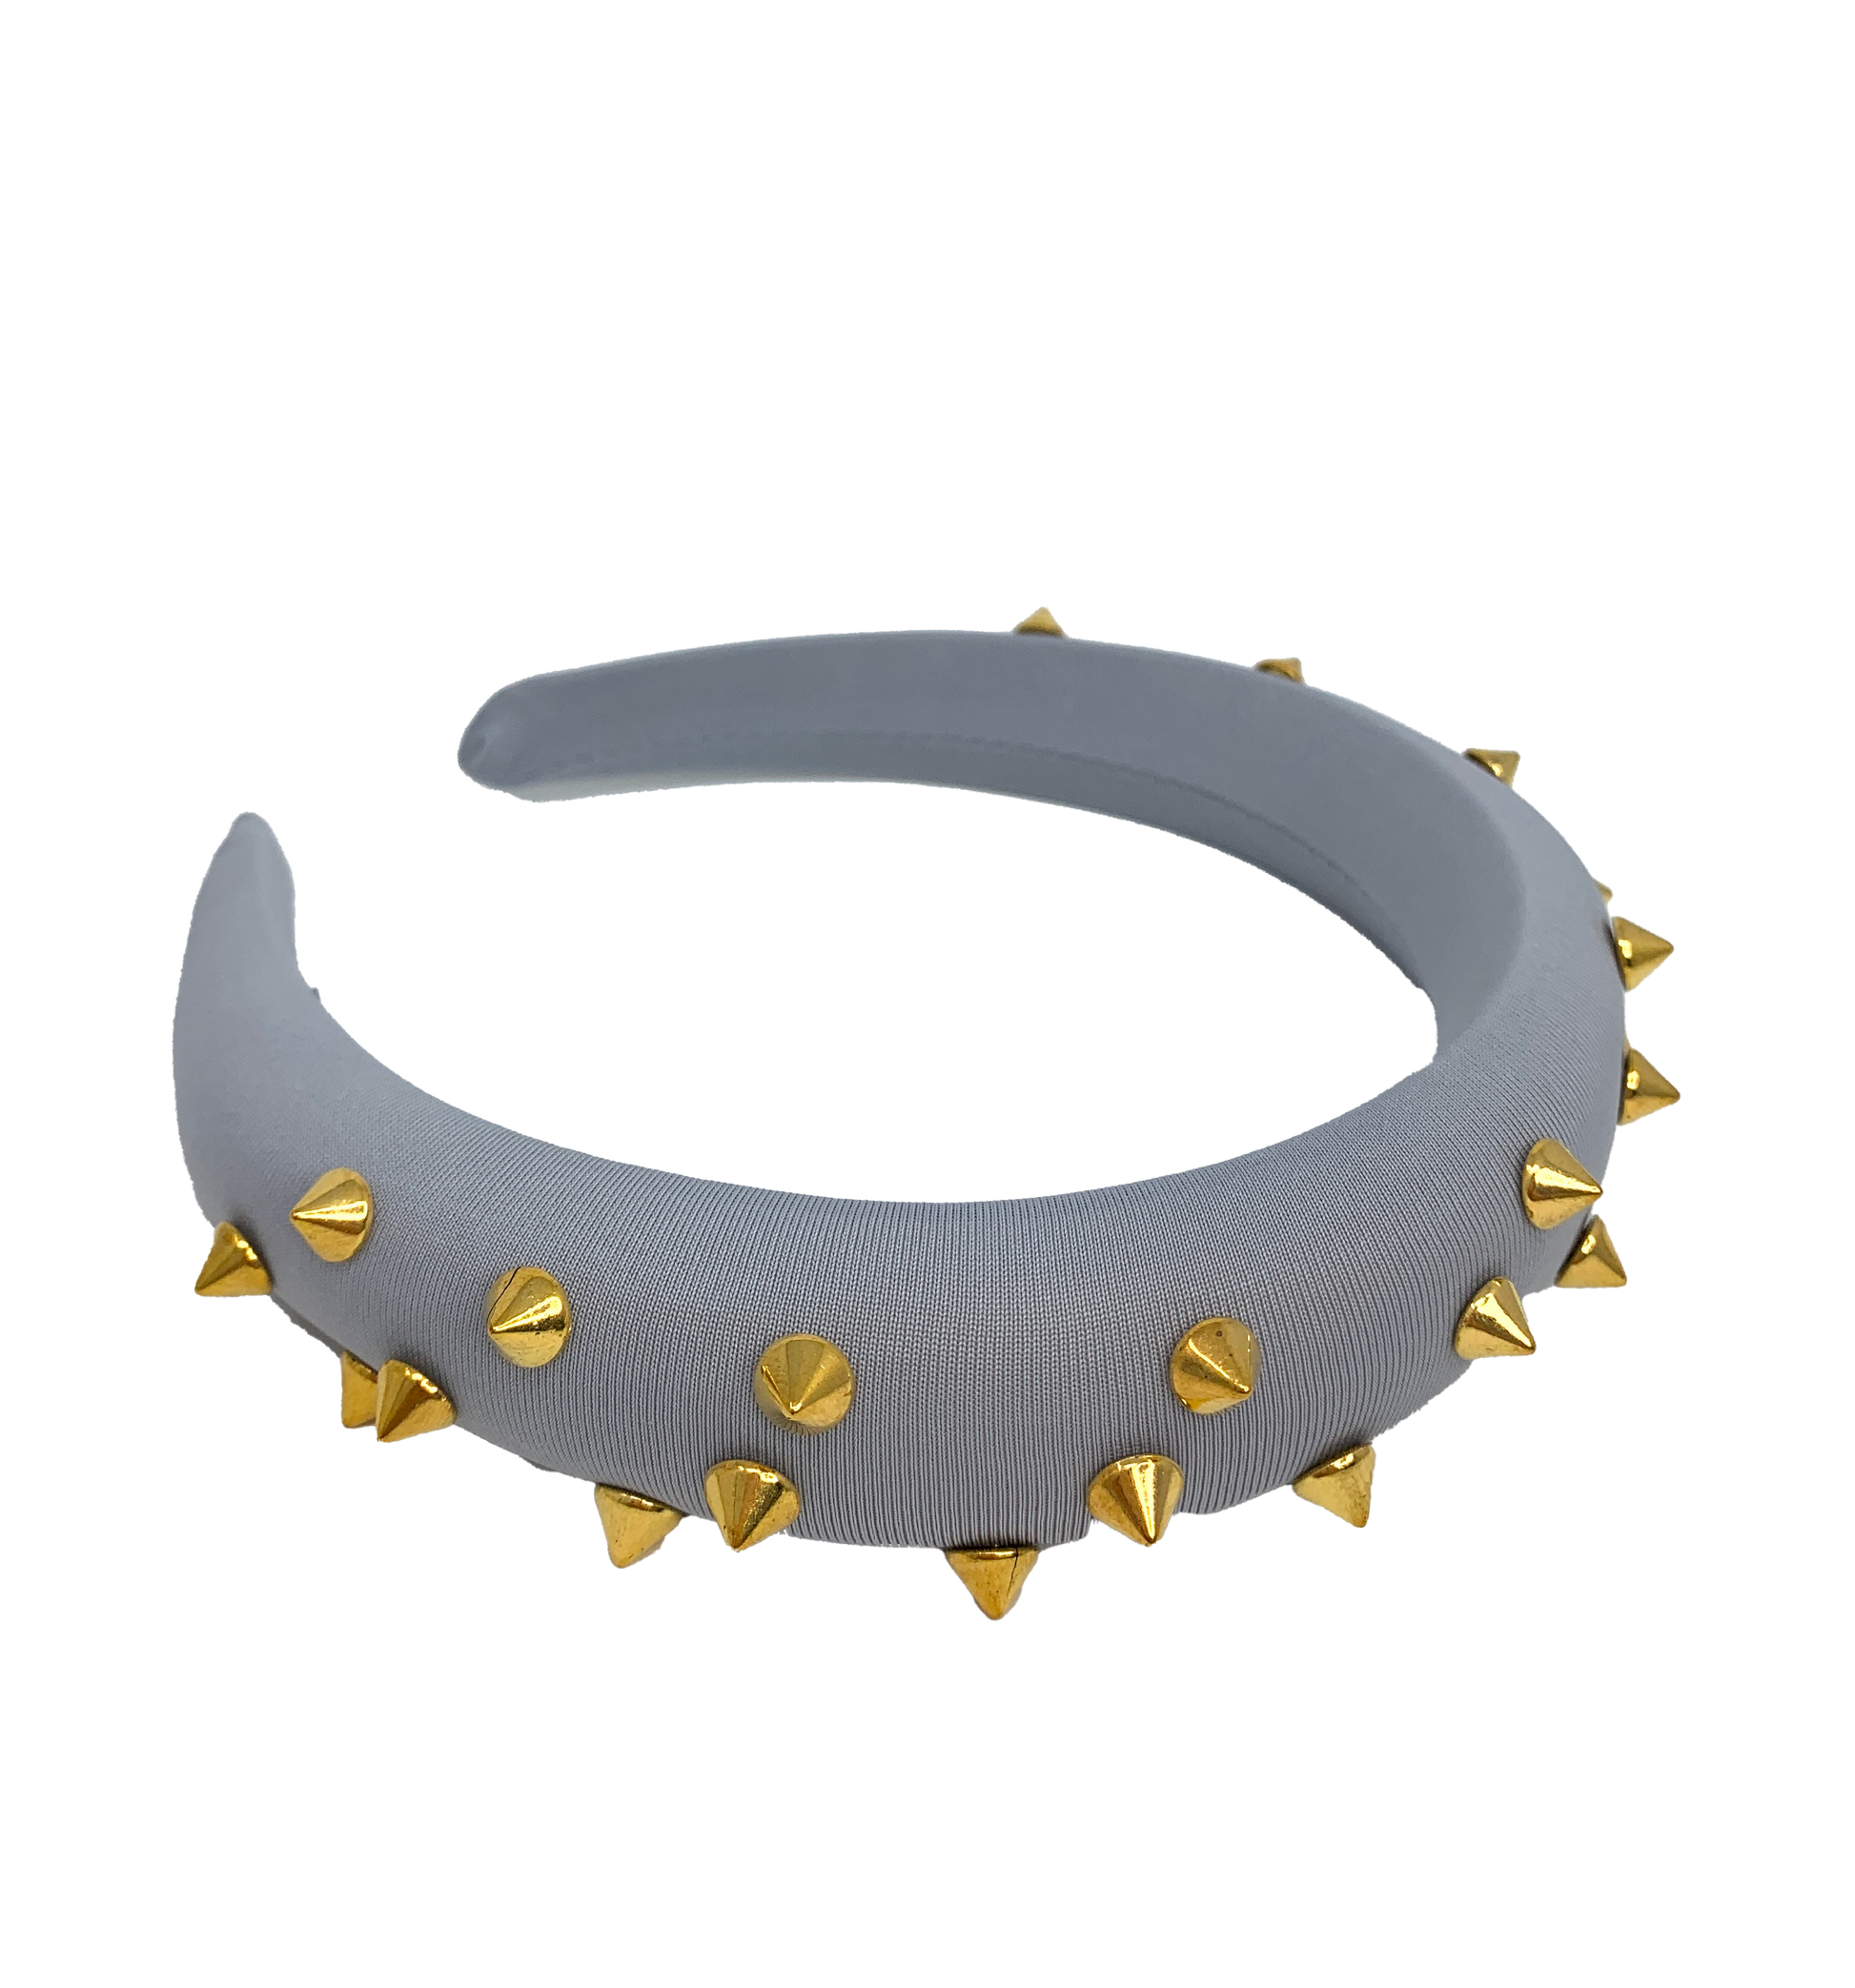 Grey padded headband with gold spikes